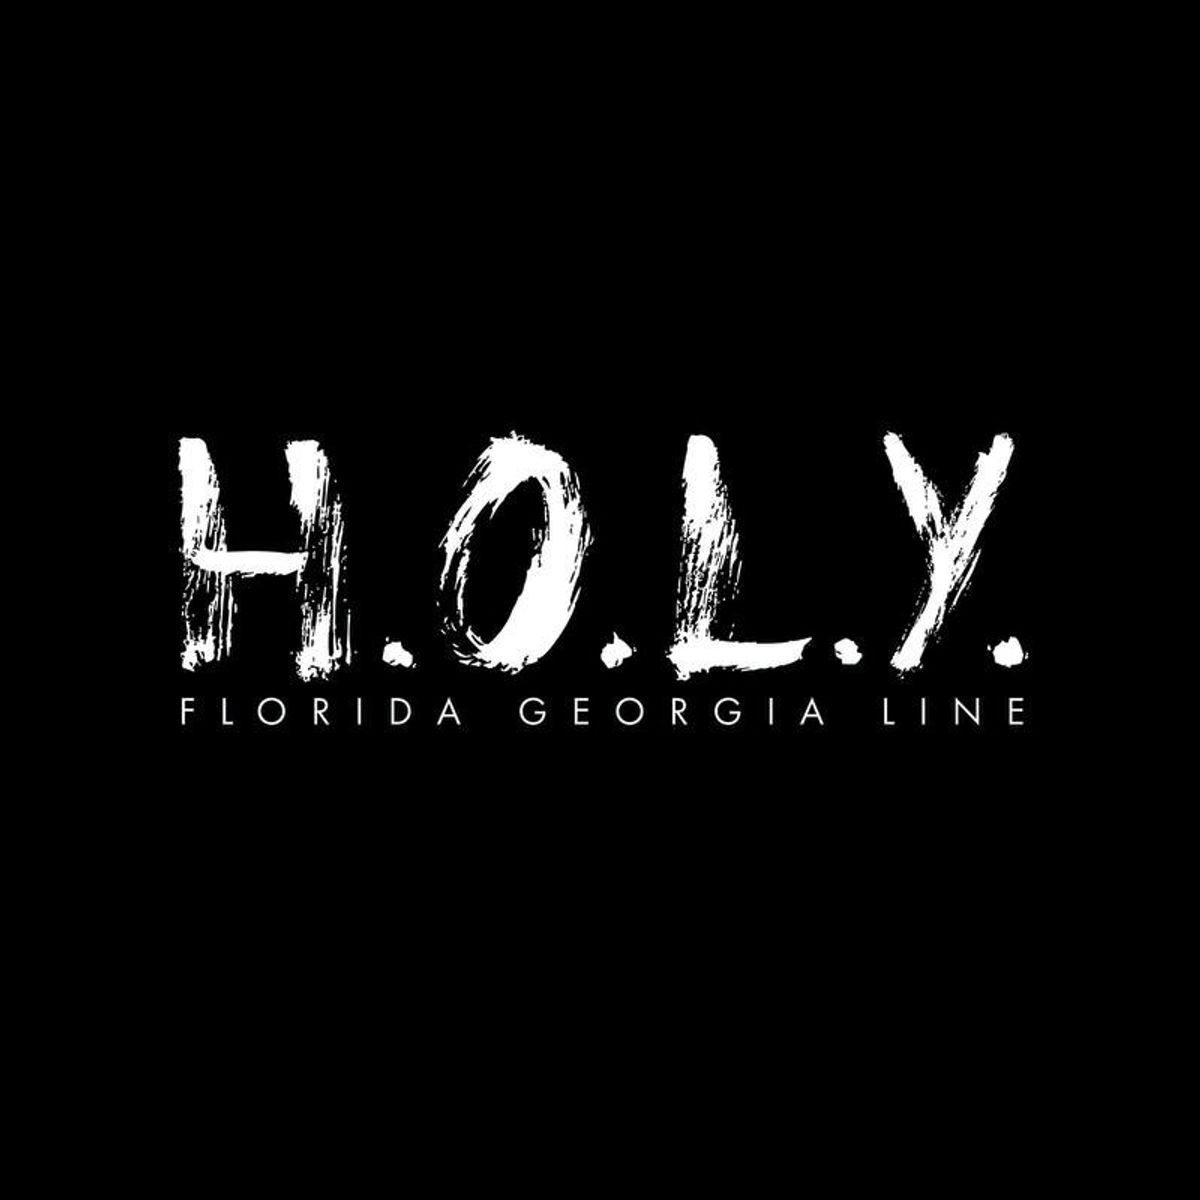 Is Florida Georgia Line's "H.O.L.Y" Controversial?